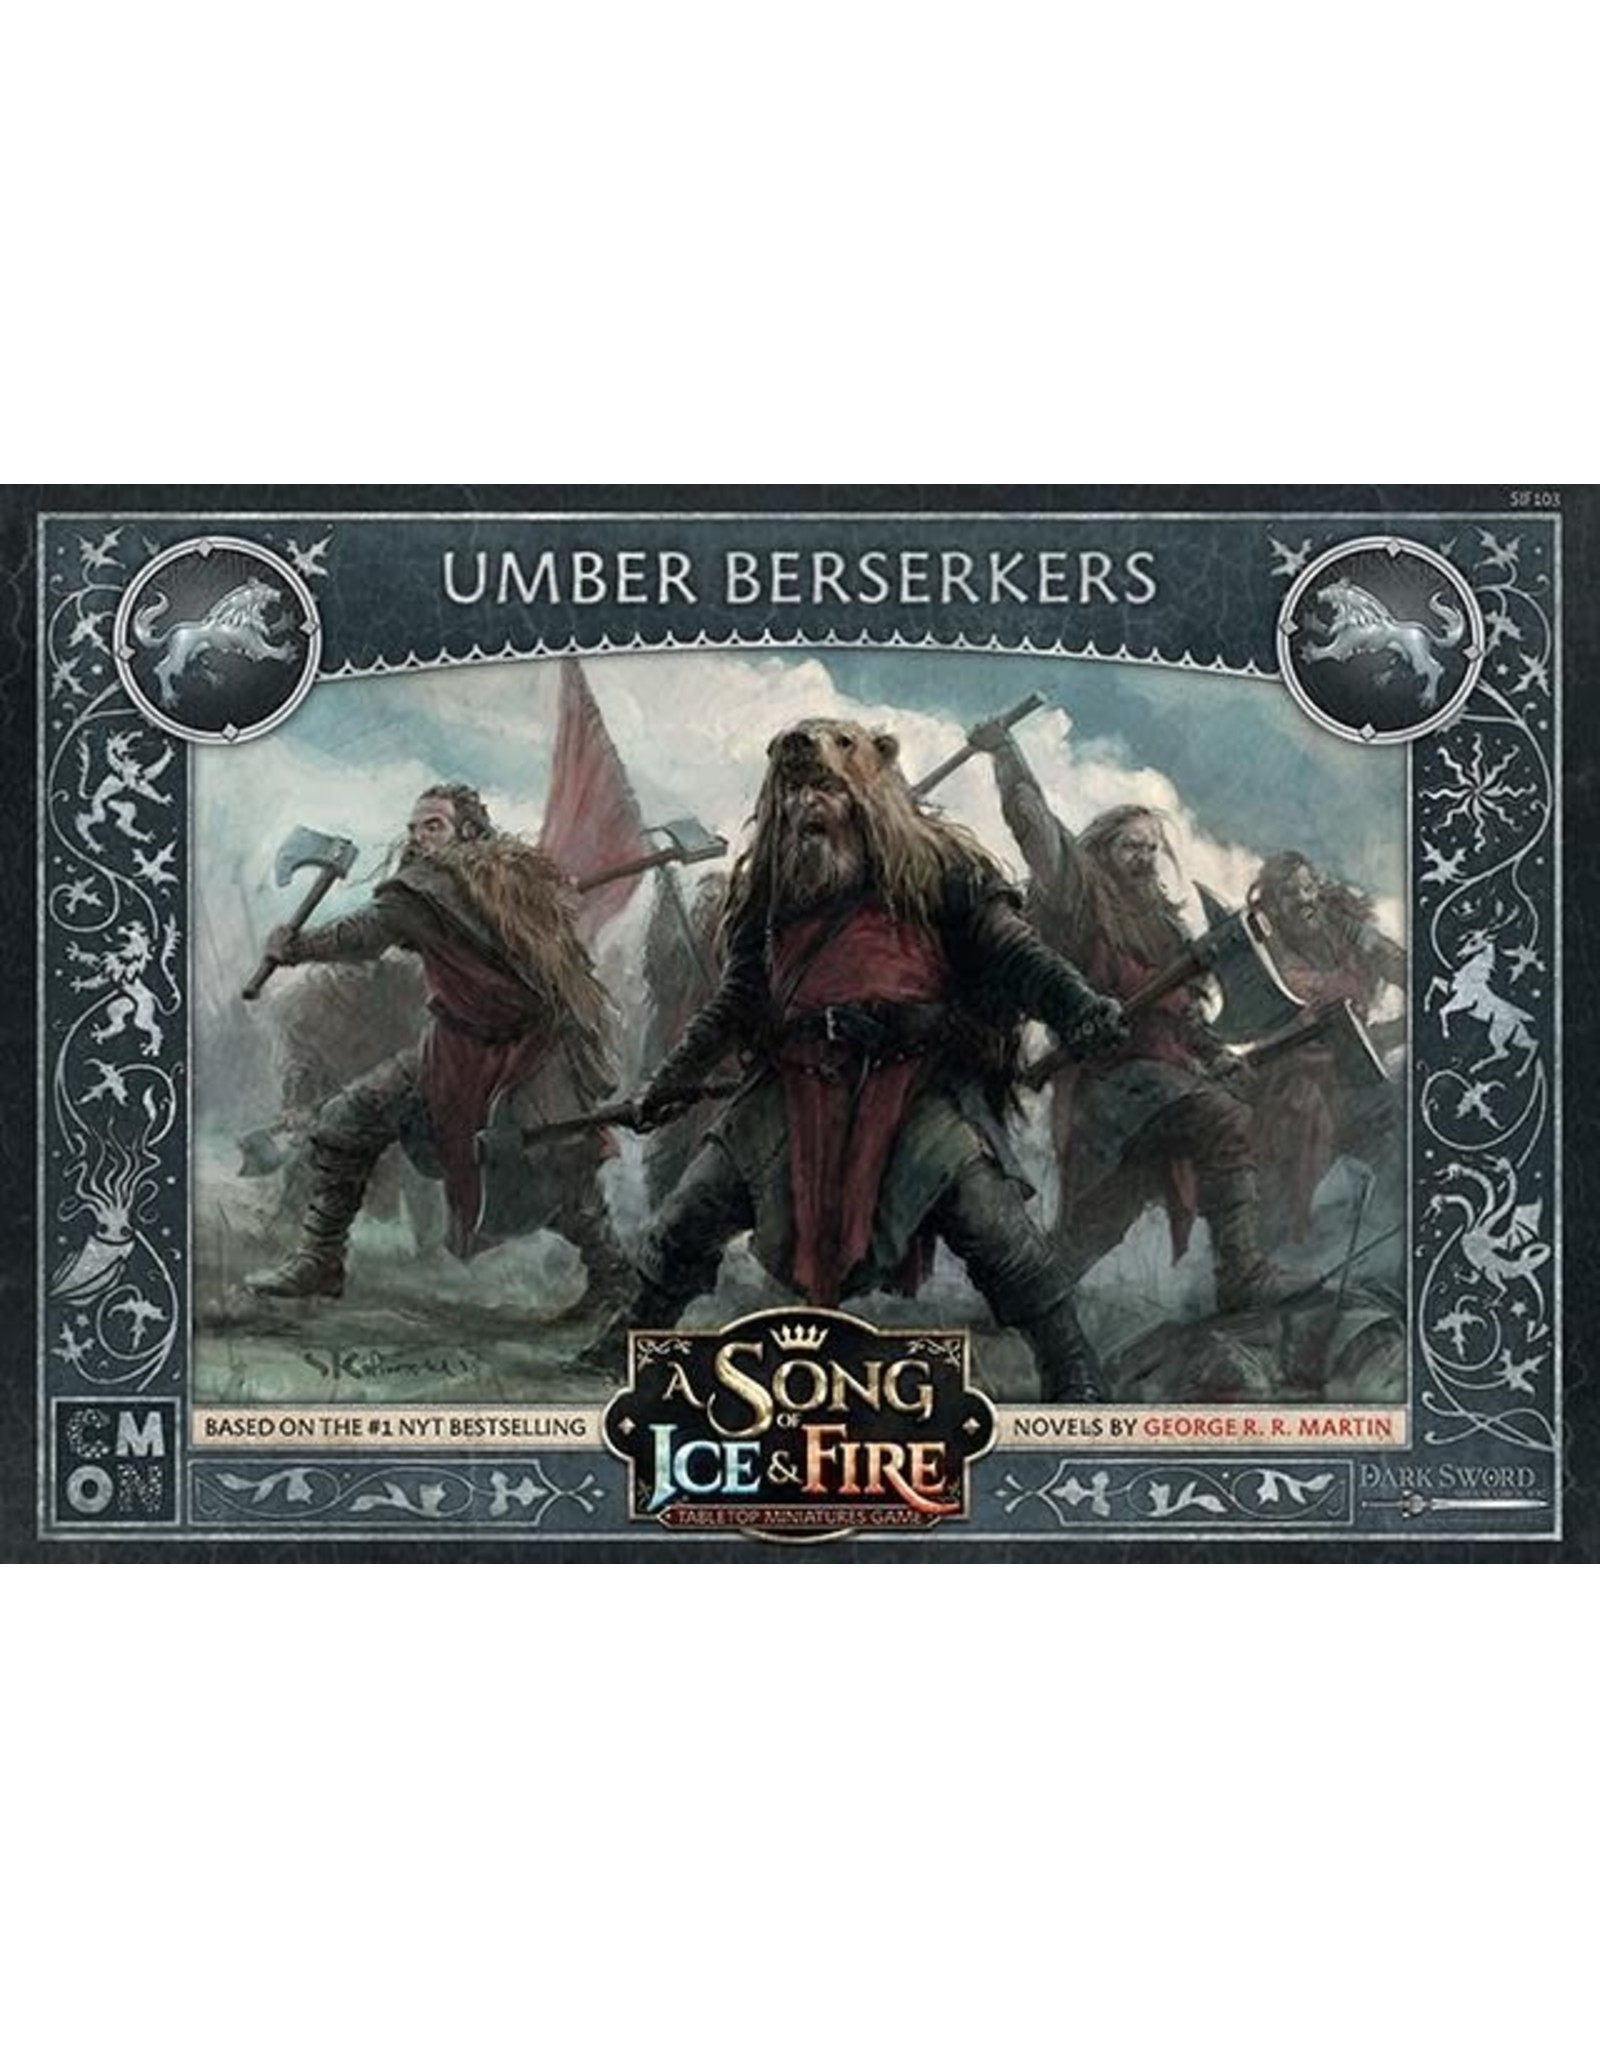 CMON A SONG OF ICE & FIRE: UMBER BERSERKERS